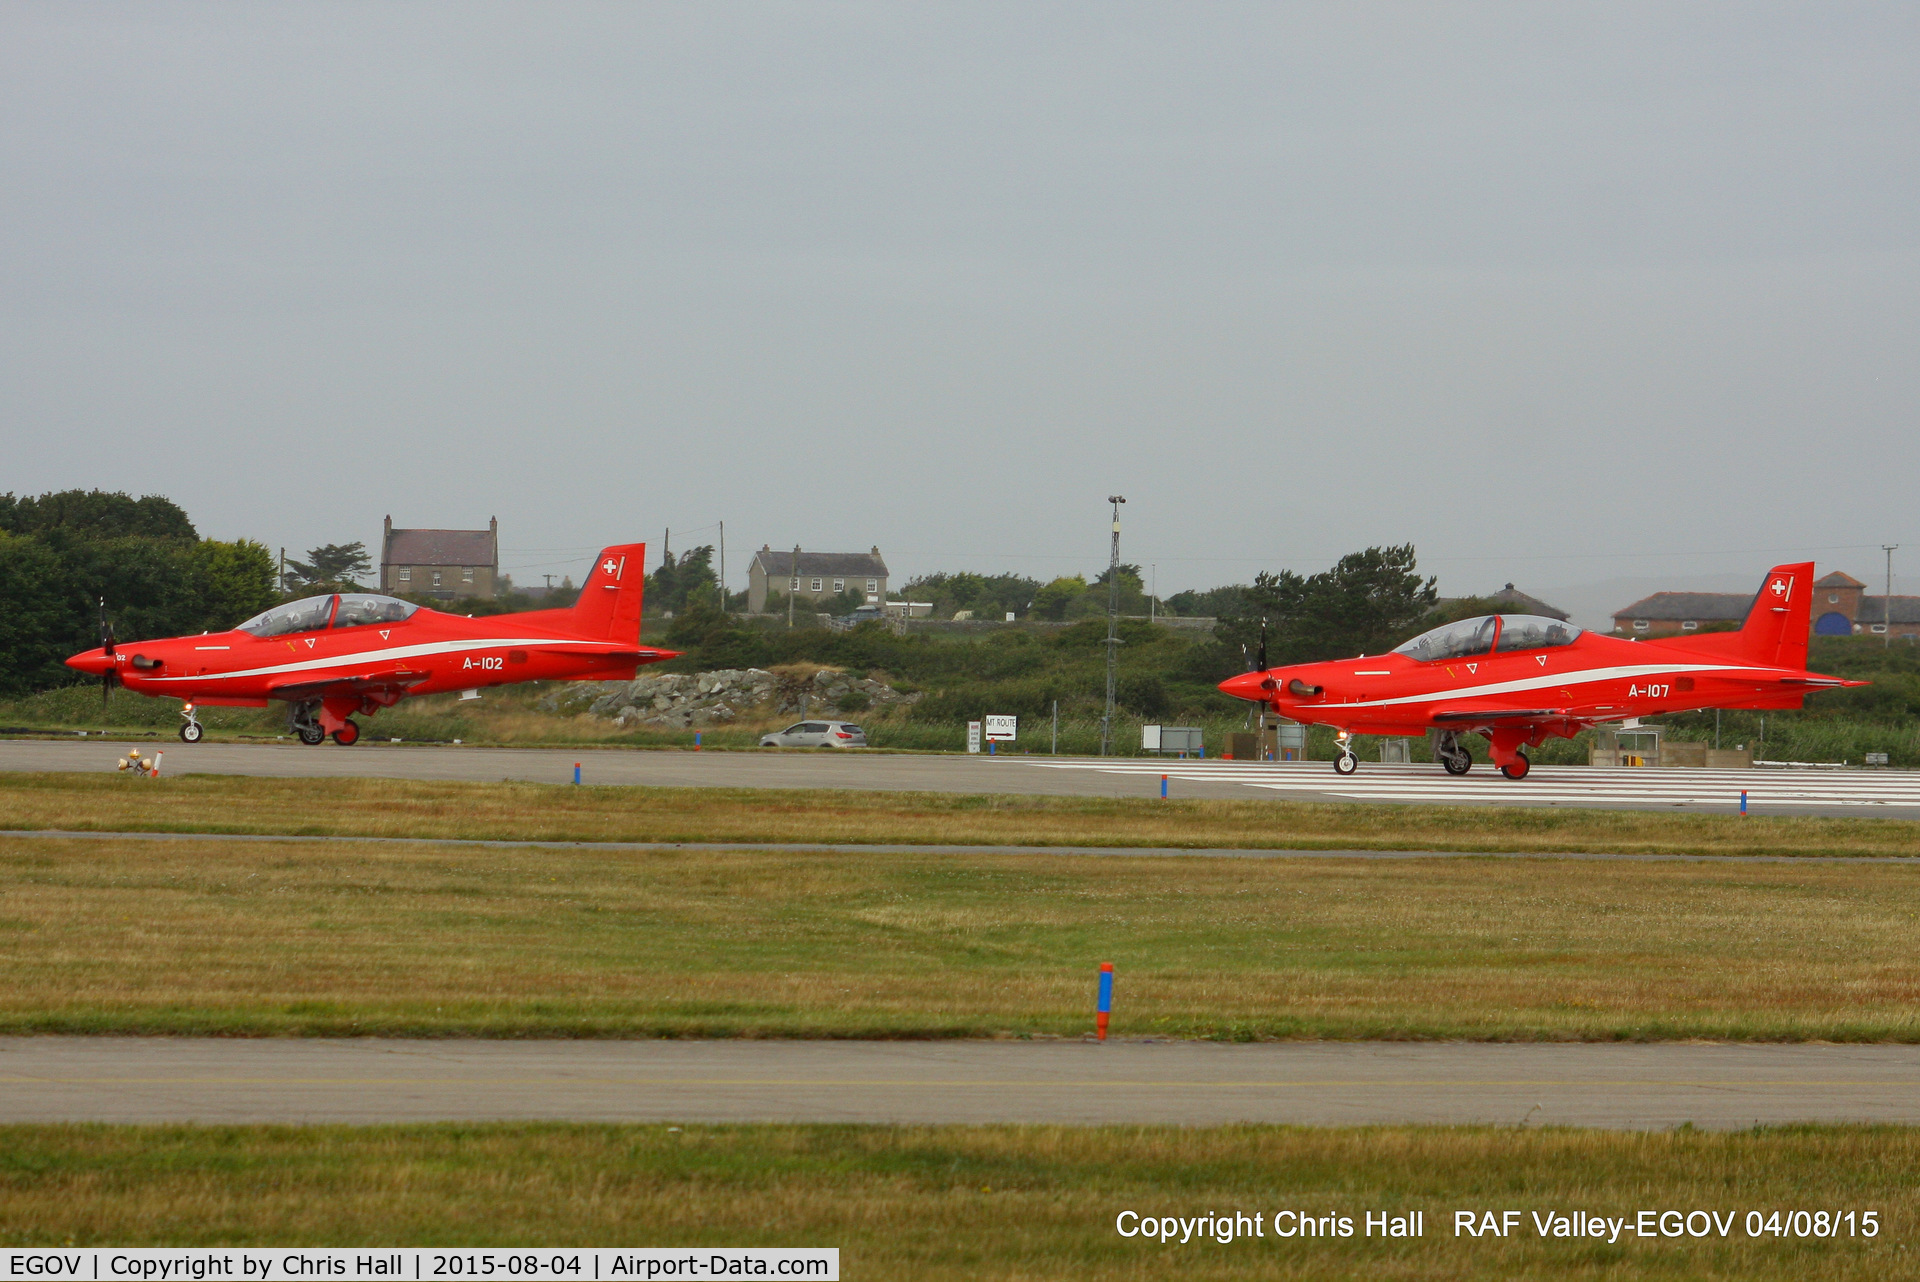 Anglesey Airport (Maes Awyr Môn) or RAF Valley, Anglesey United Kingdom (EGOV) - Swiss Air Force Pilatus PC-21's during a week long exercise at RAF Valley